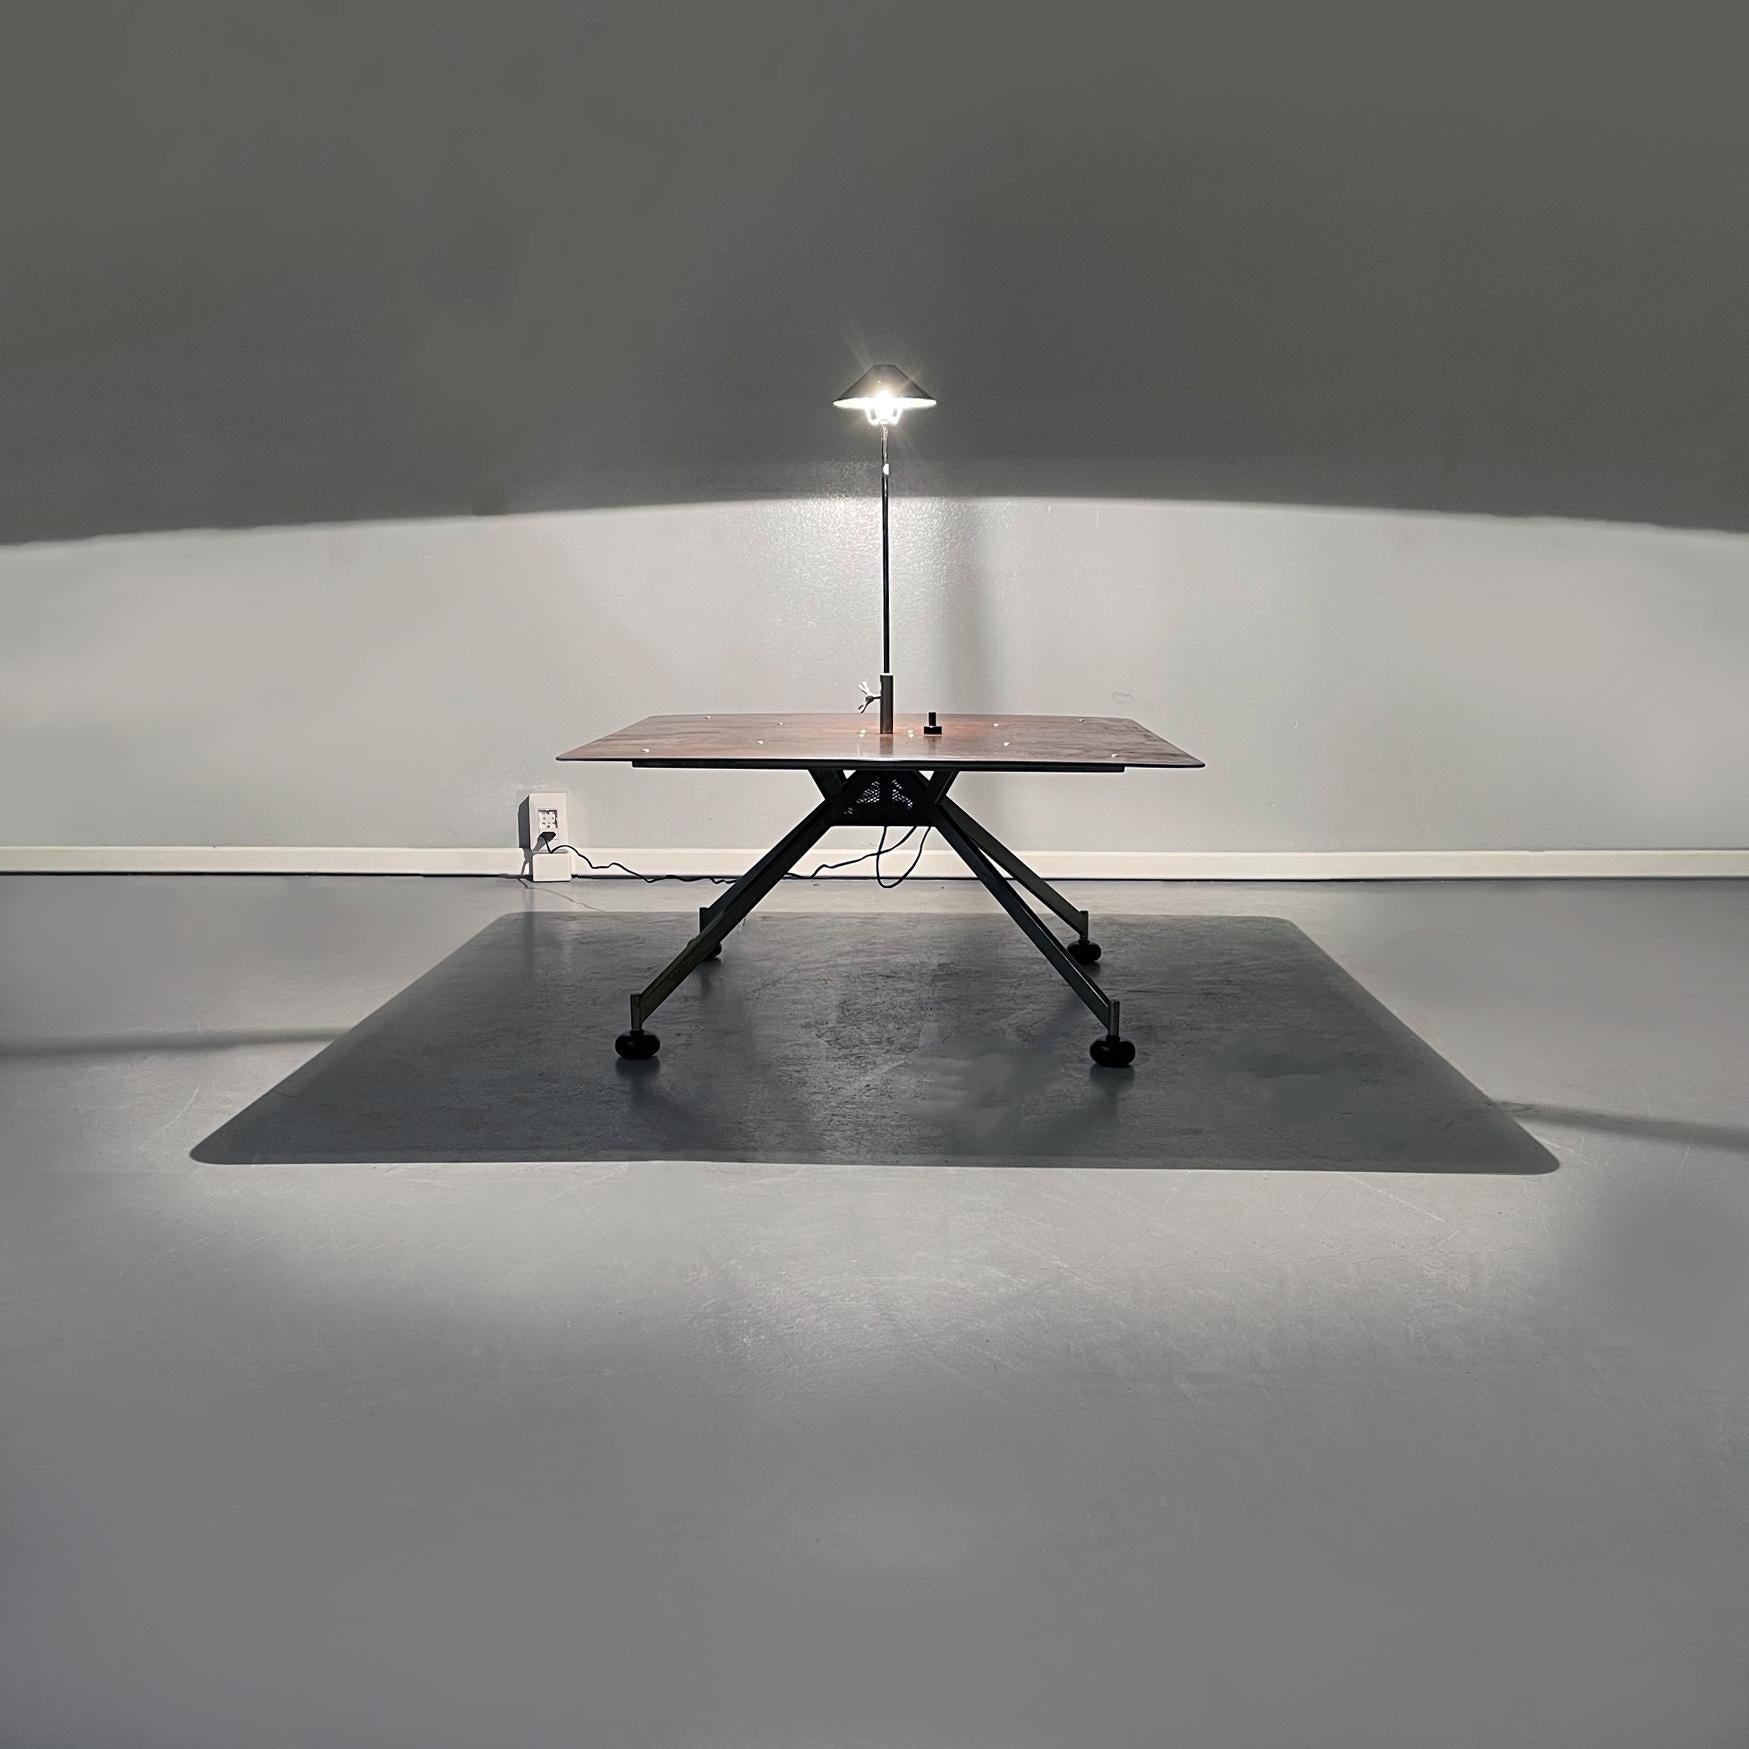 Italian Mid-Century Modern Apocalisse now coffee table by Carlo Forcolini, 1980s.
Apocalisse now square coffee table in iron with legs in pyramid structure. In the center of the piano is the lamp, the height and intensity of the light of the lamp